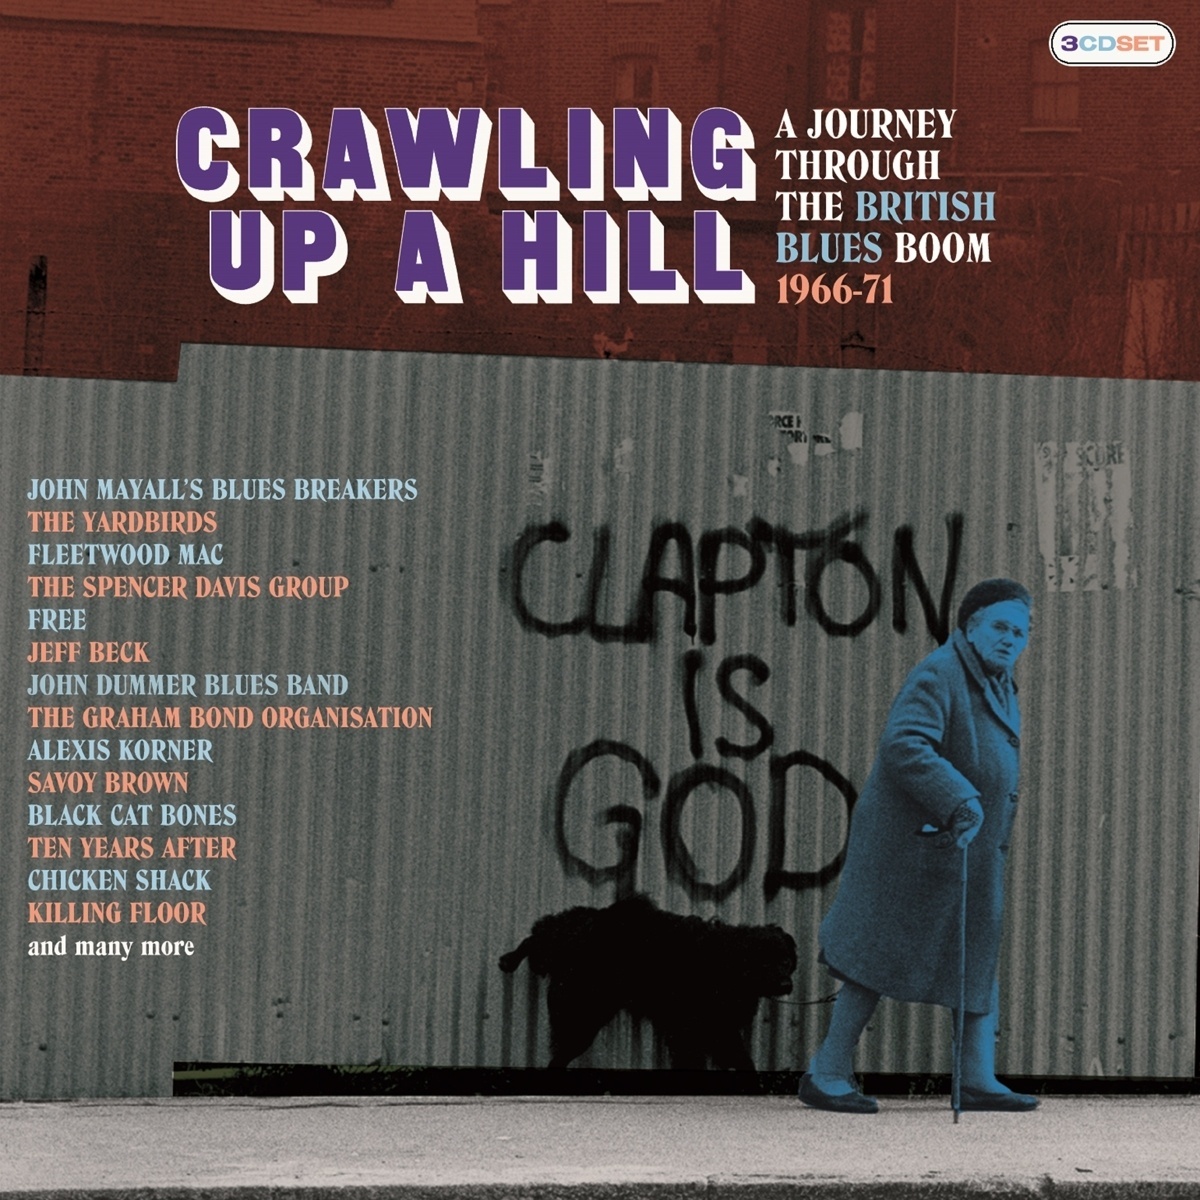 Crawling Up A Hill ~ A Journey Through The British - Various. (CD)